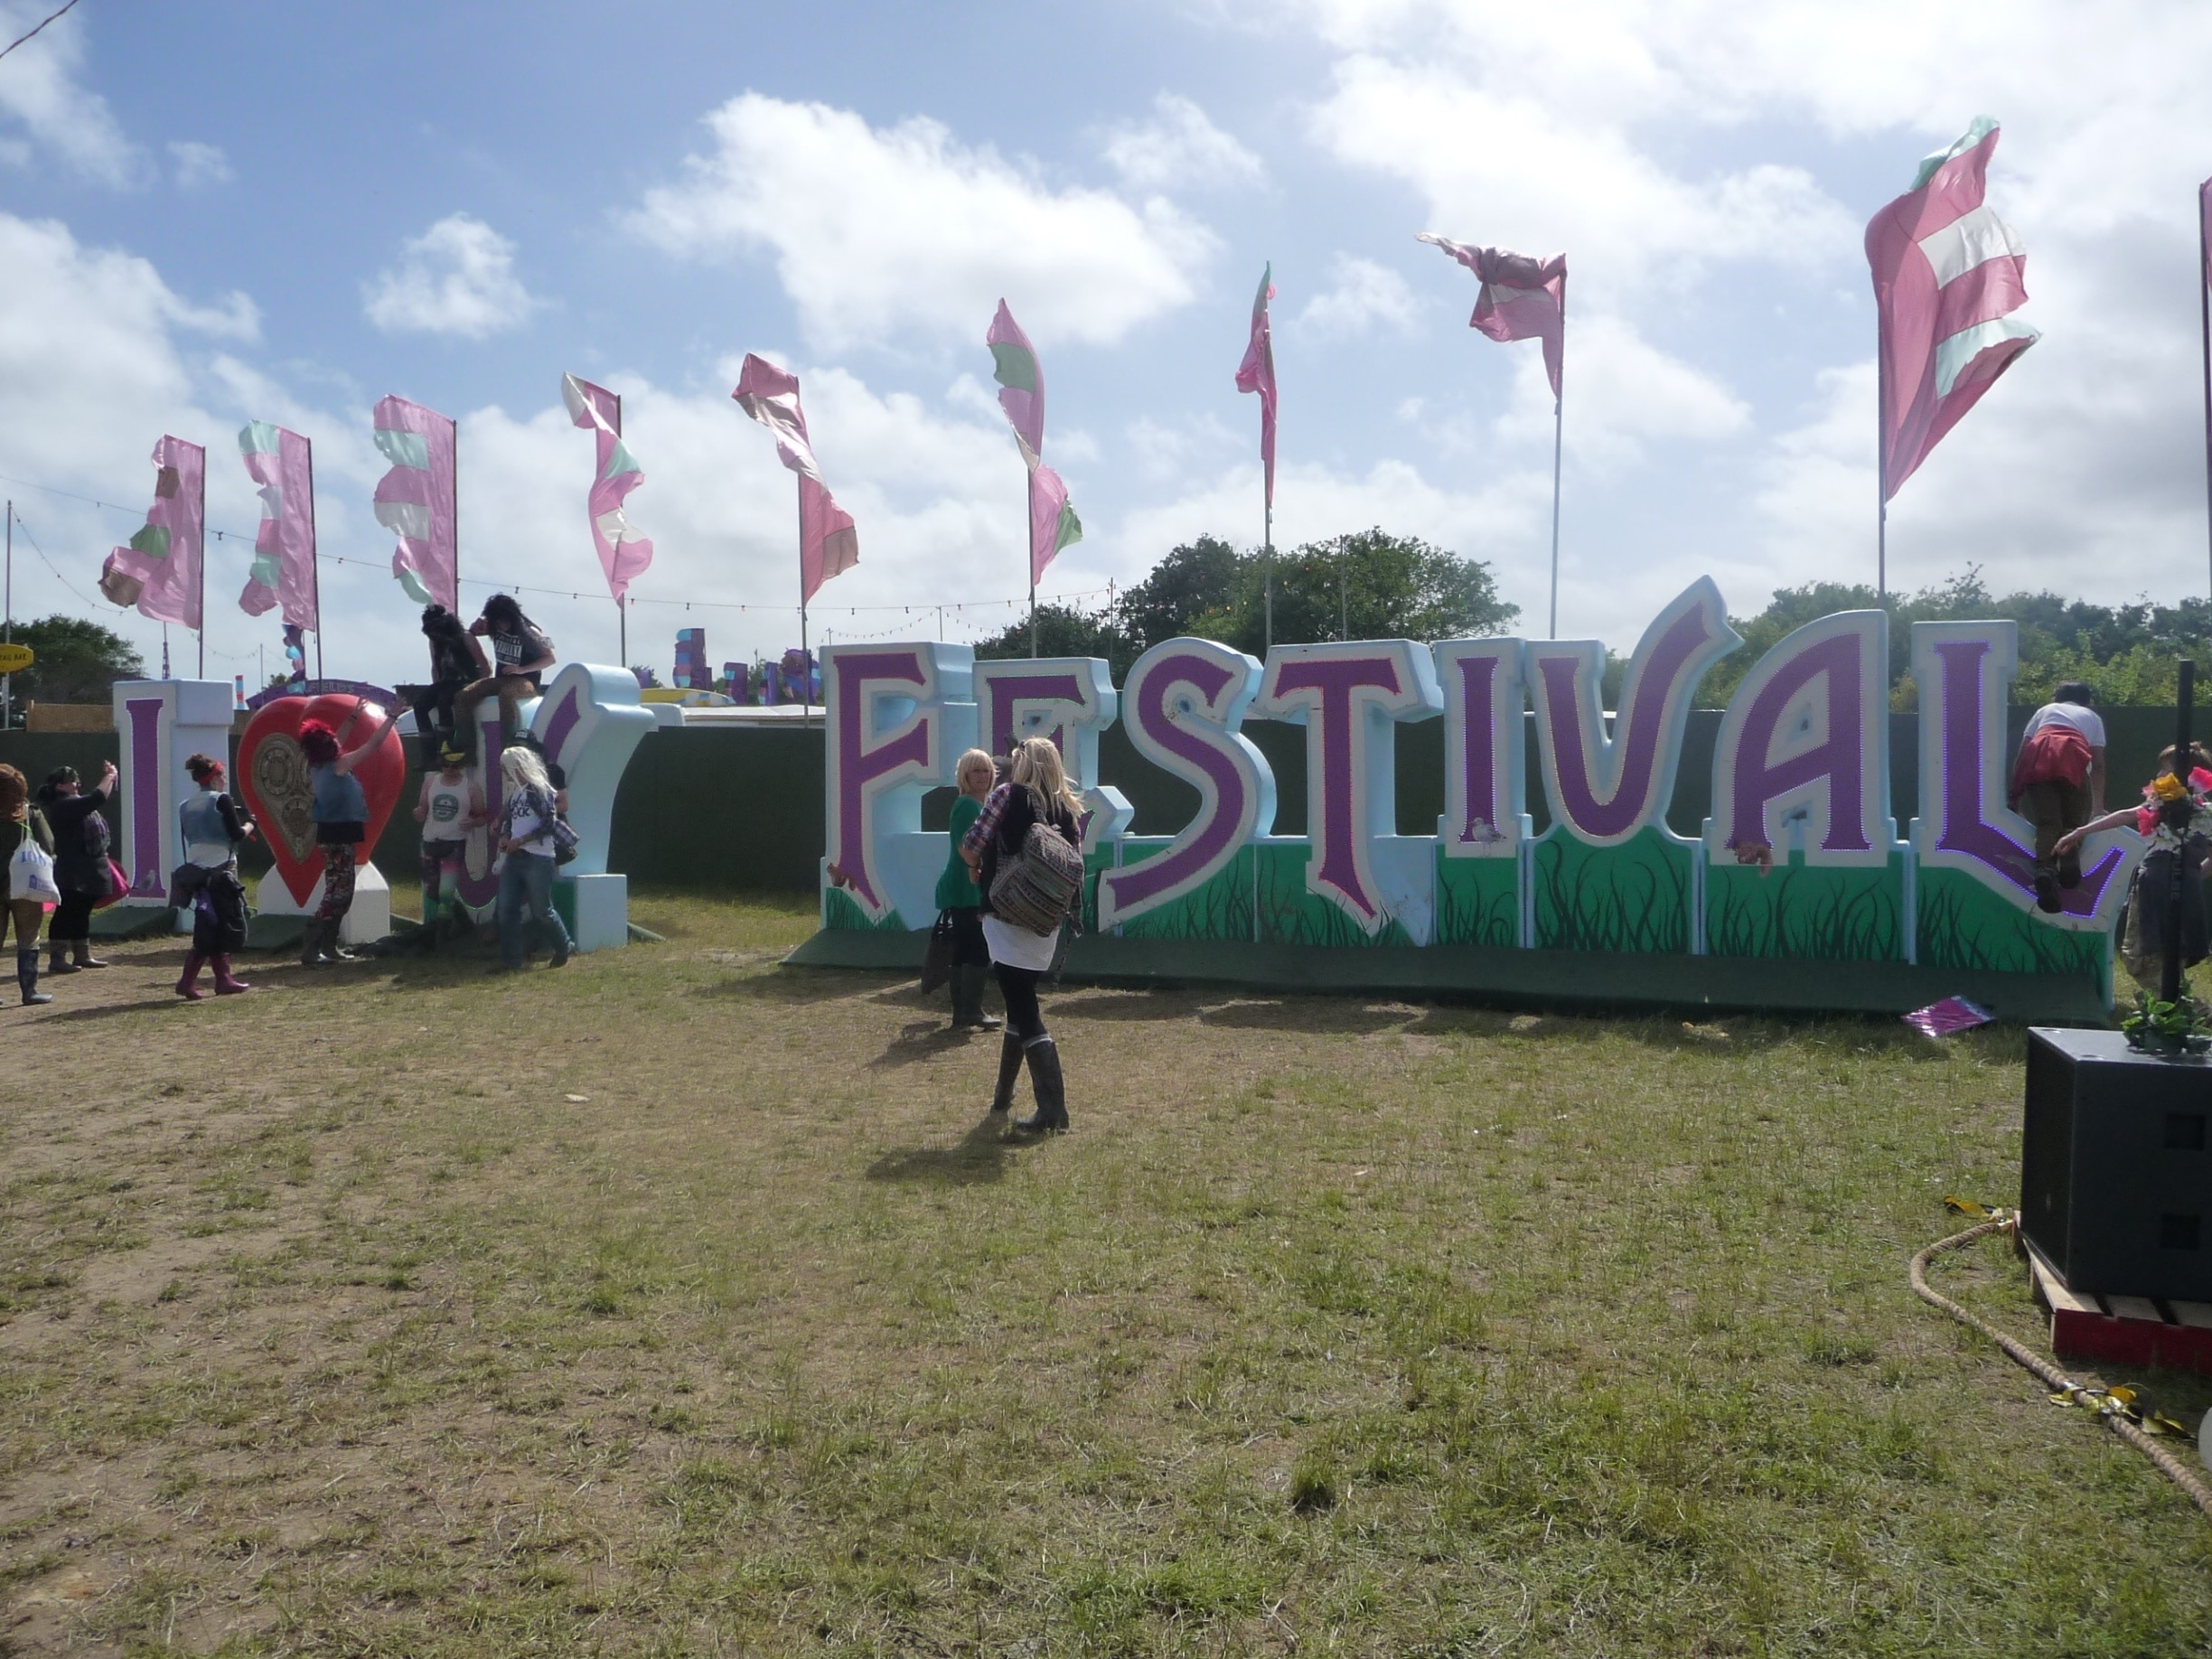 The famous Isle of Wight Festival. One of the best festivals in the UK. Held the second weekend in June each year.